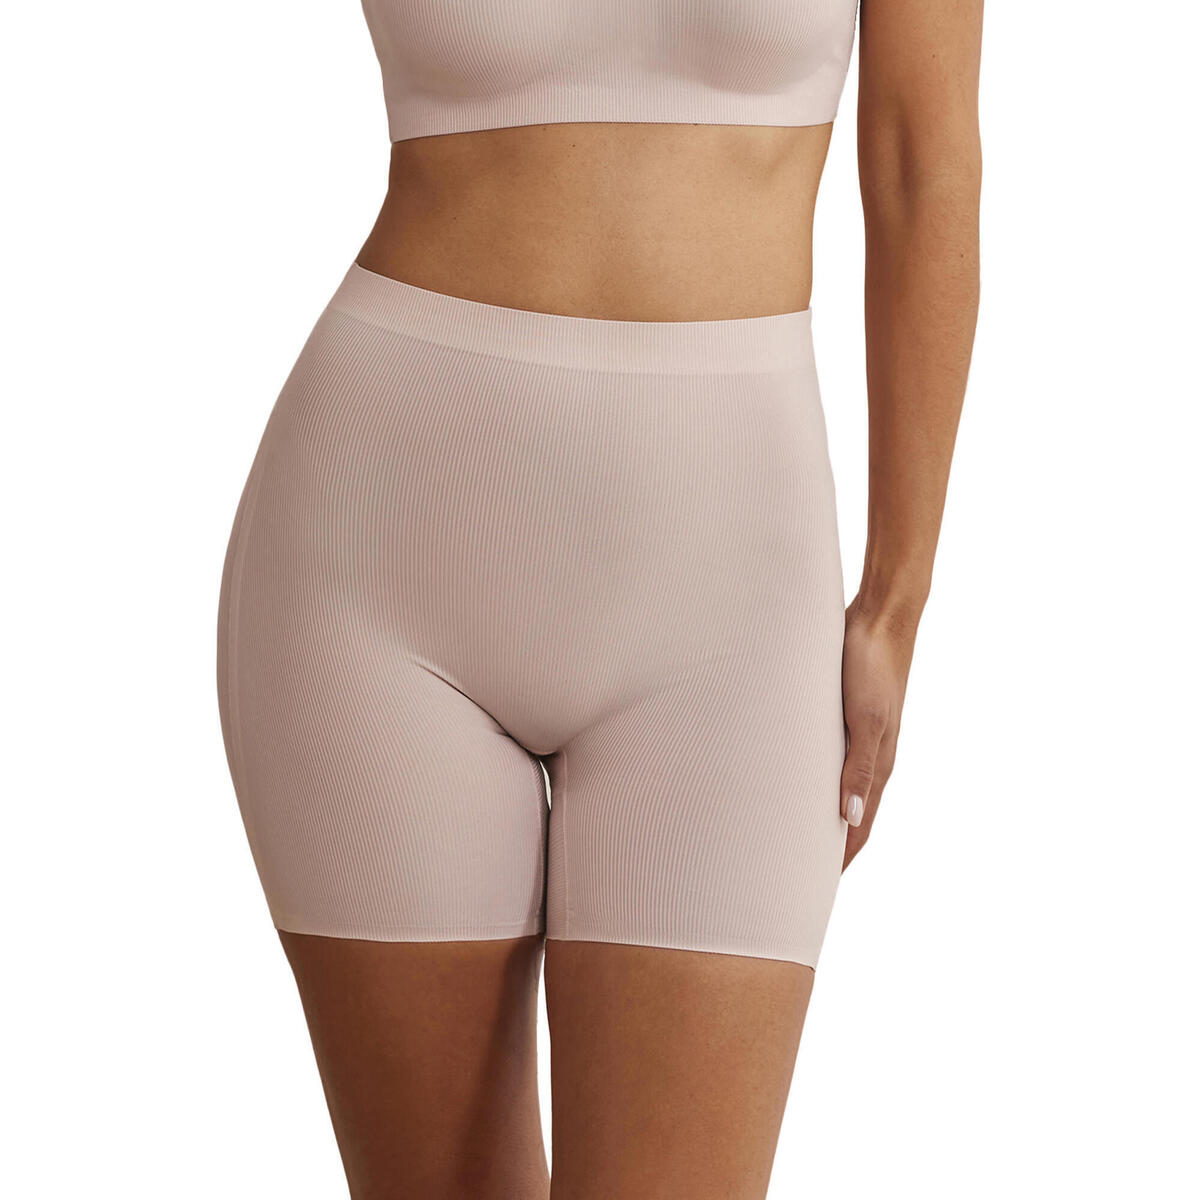 Selmark Rose Shorty-panty gainant taille haute One nz8Hk0iO